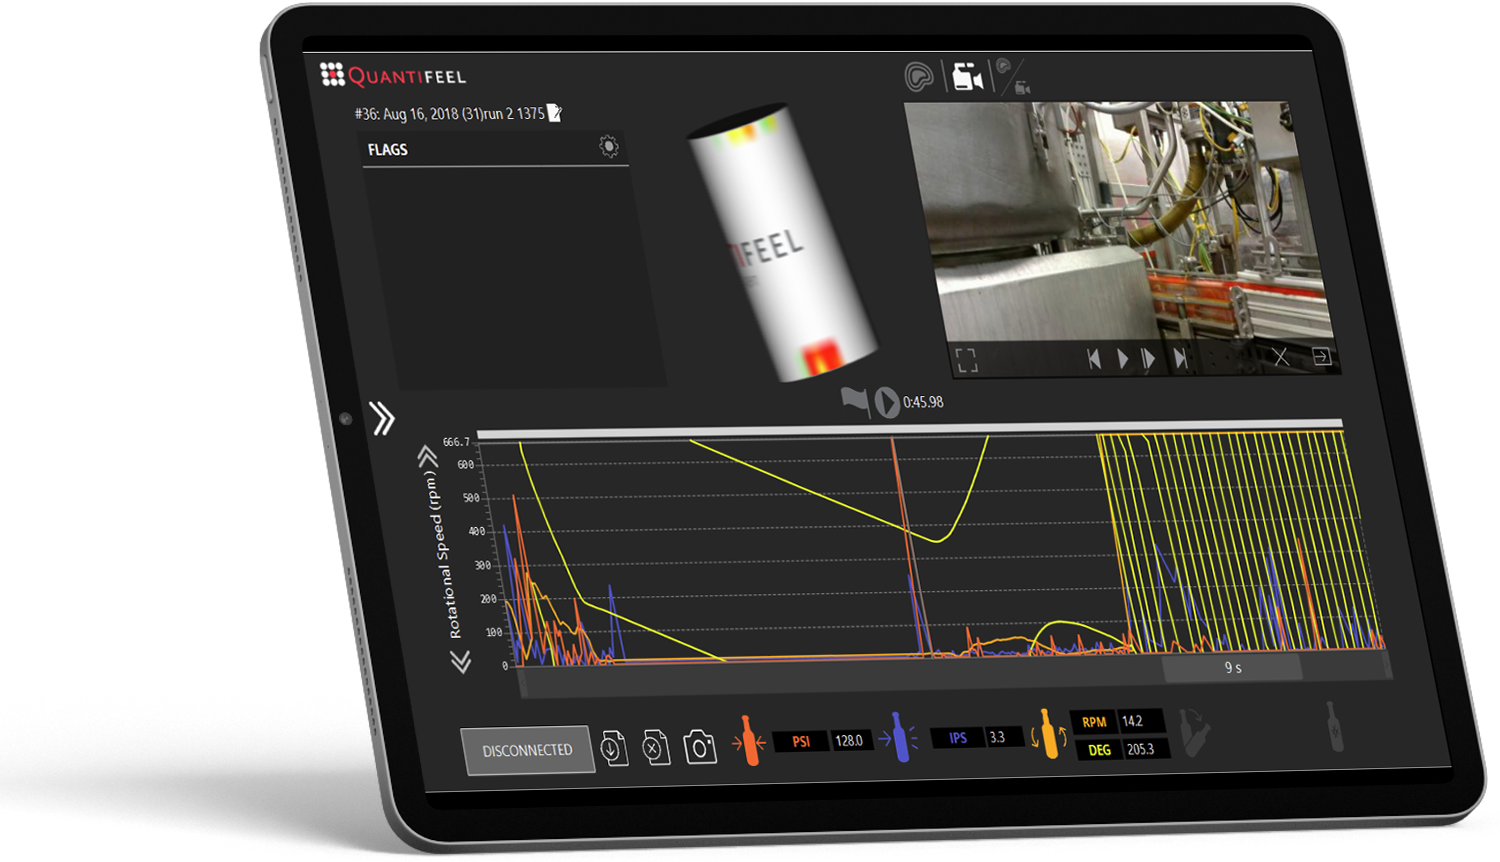 Tablet with Quantifeel Analyzer software showing pressure chart, video footage and pressure map identifying container damage.